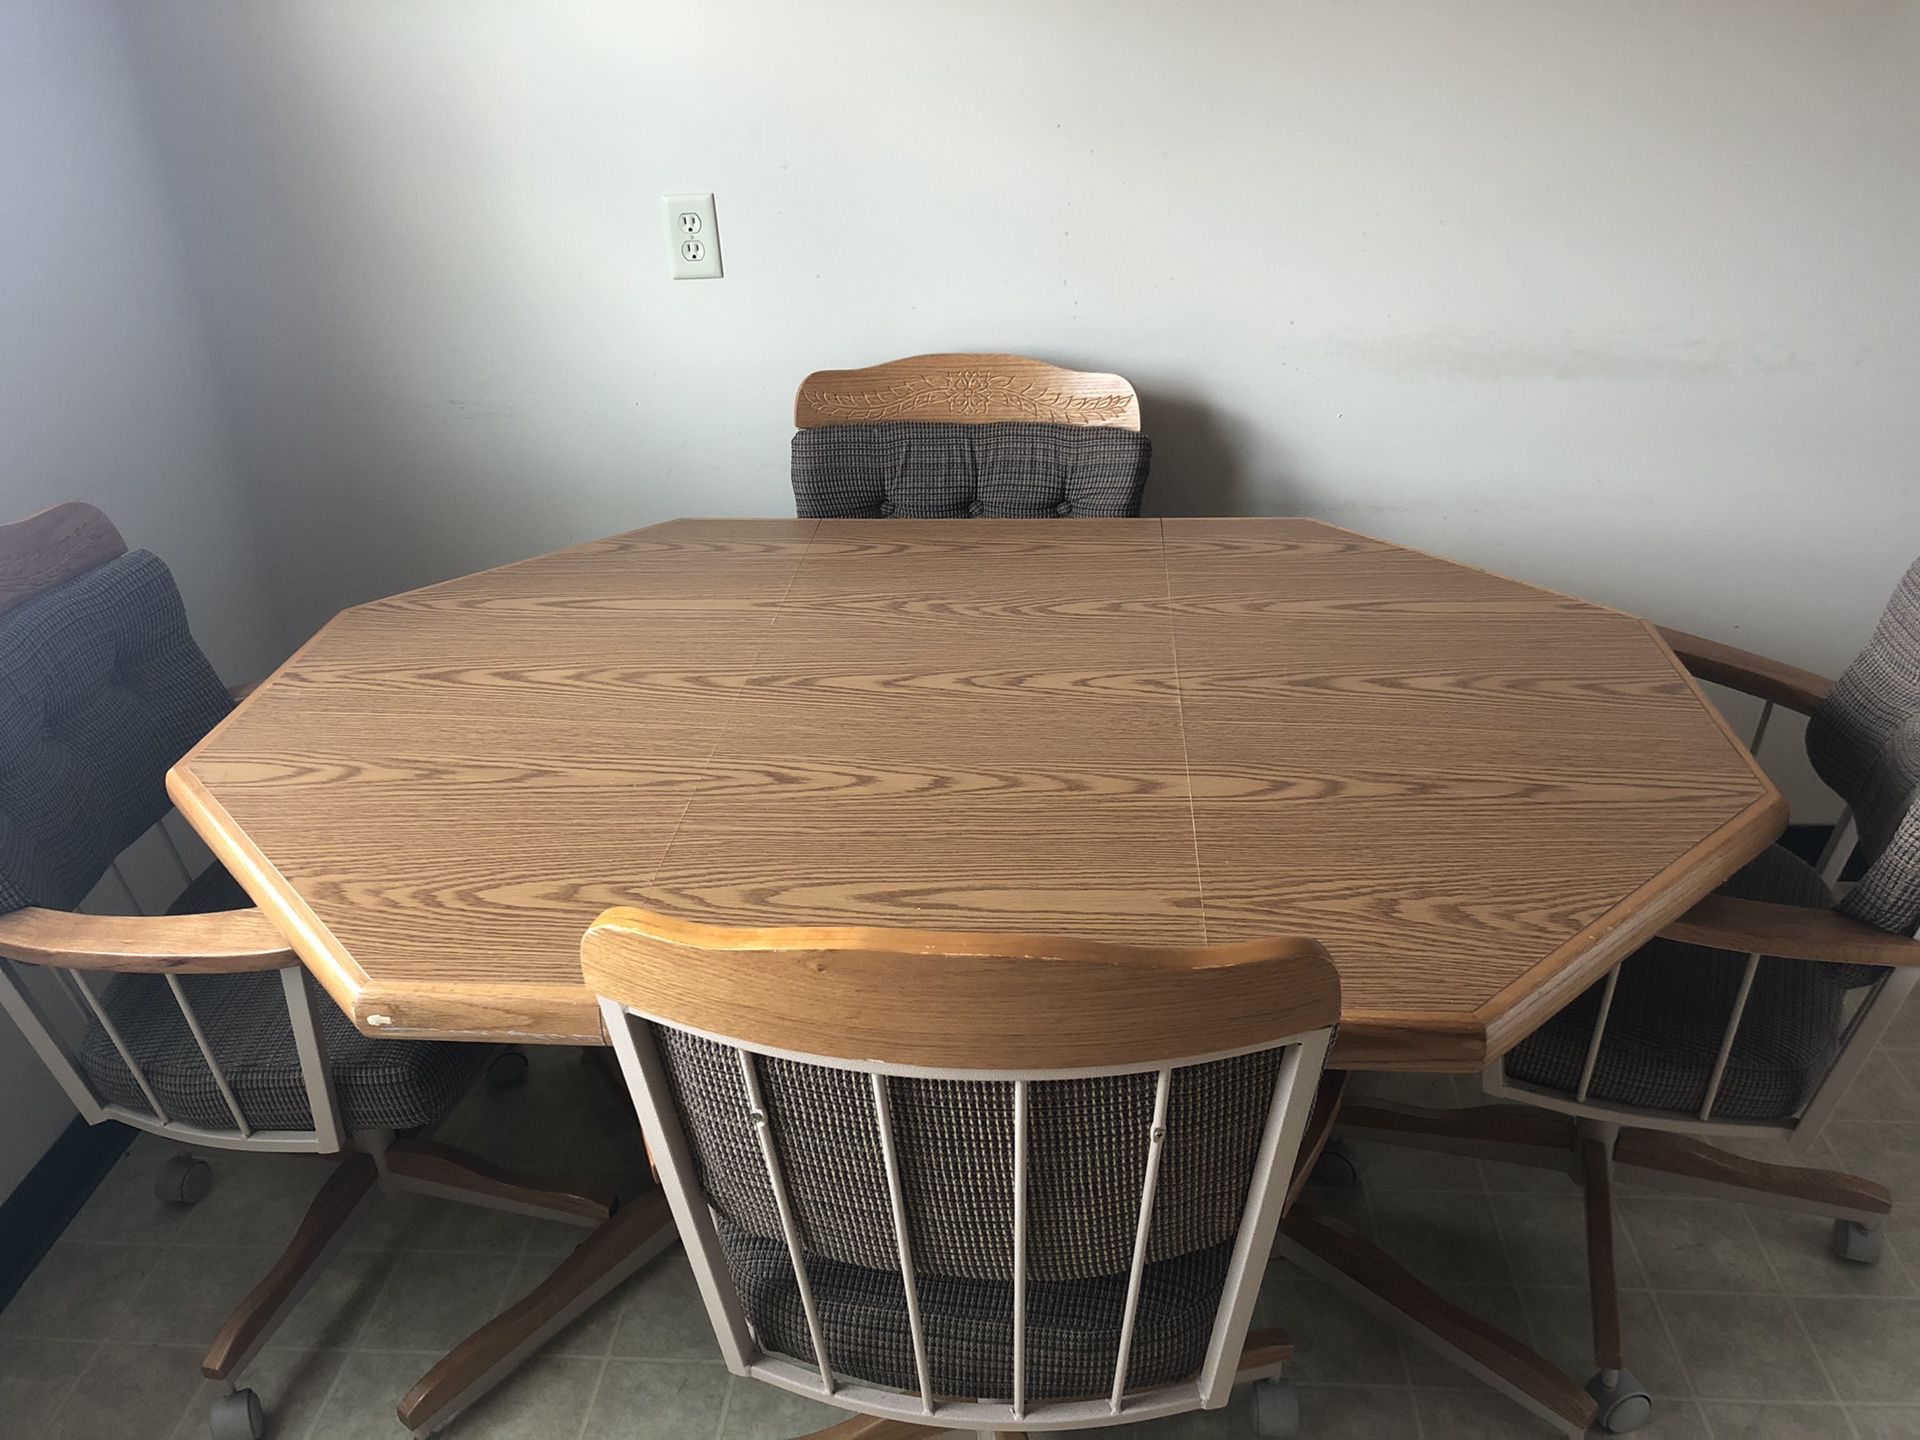 Kitchen Desk with Chairs